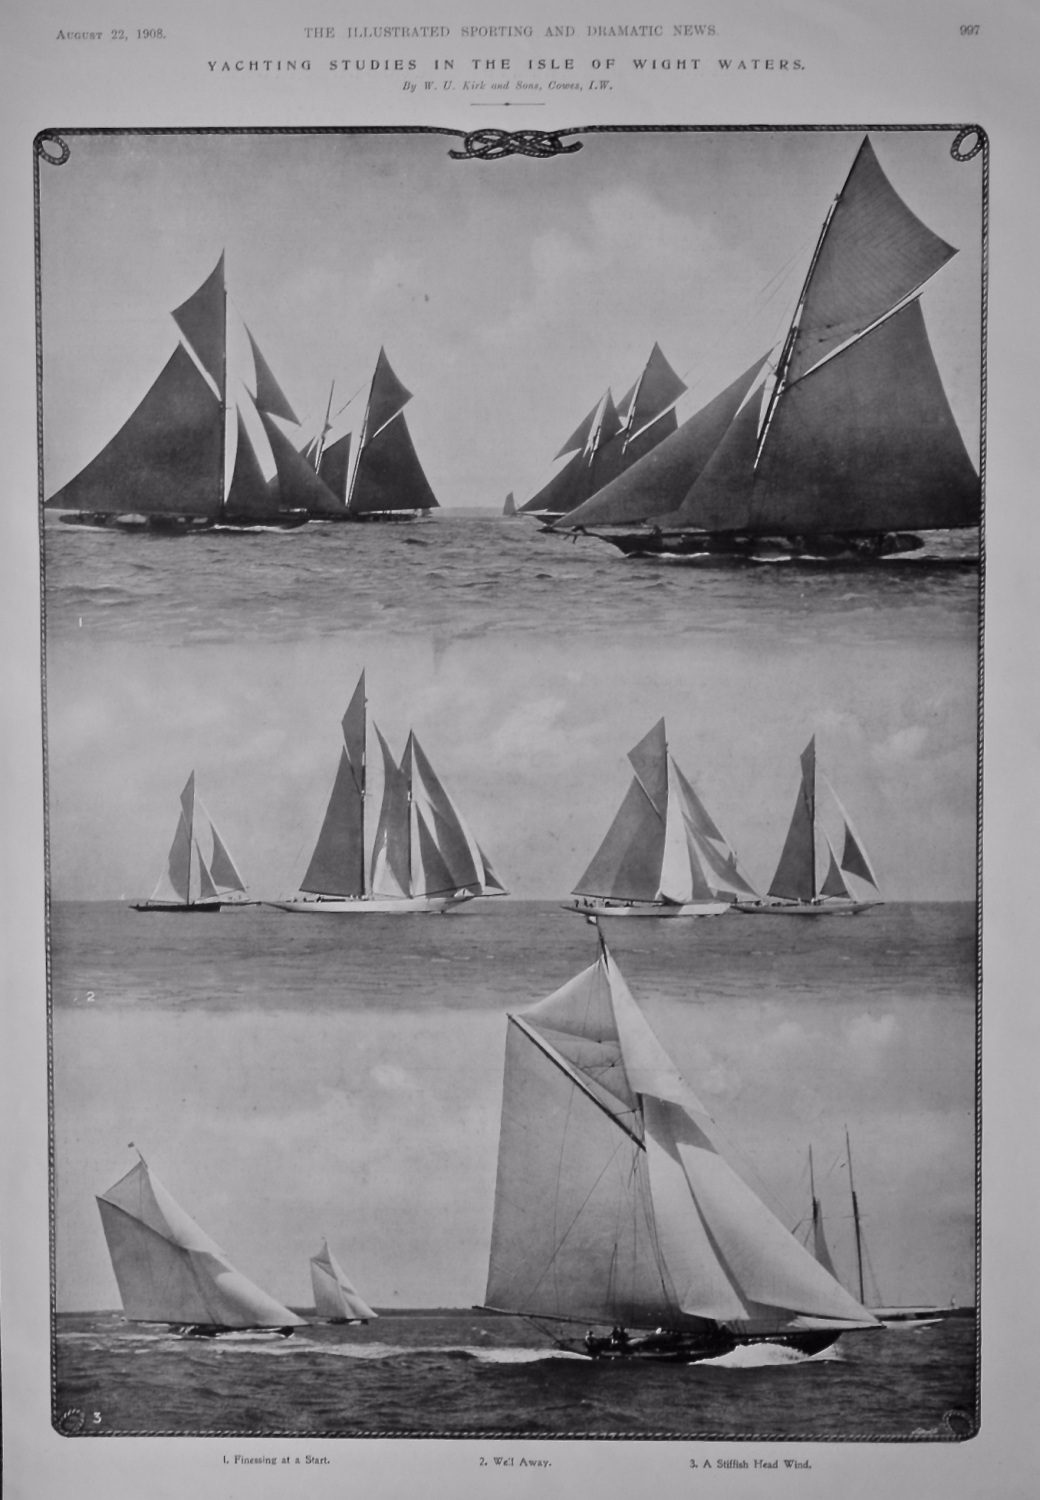 Yachting Studies in the isle of Wight Waters.  1908.